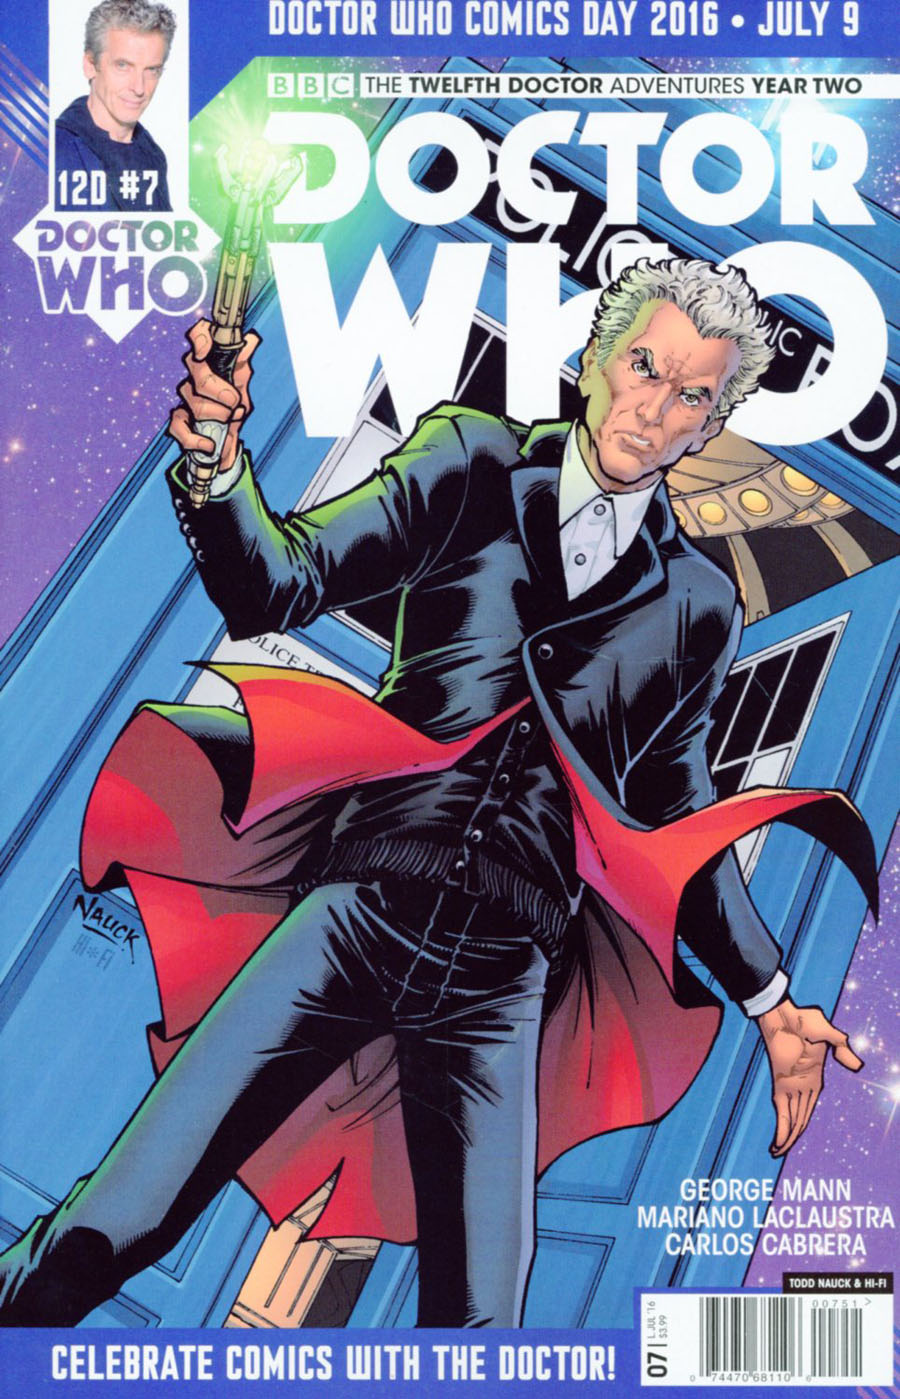 Doctor Who 12th Doctor Year Two #9 Cover E Variant Todd Nauck & Hi-Fi Doctor Who Comics Day 2016 Cover